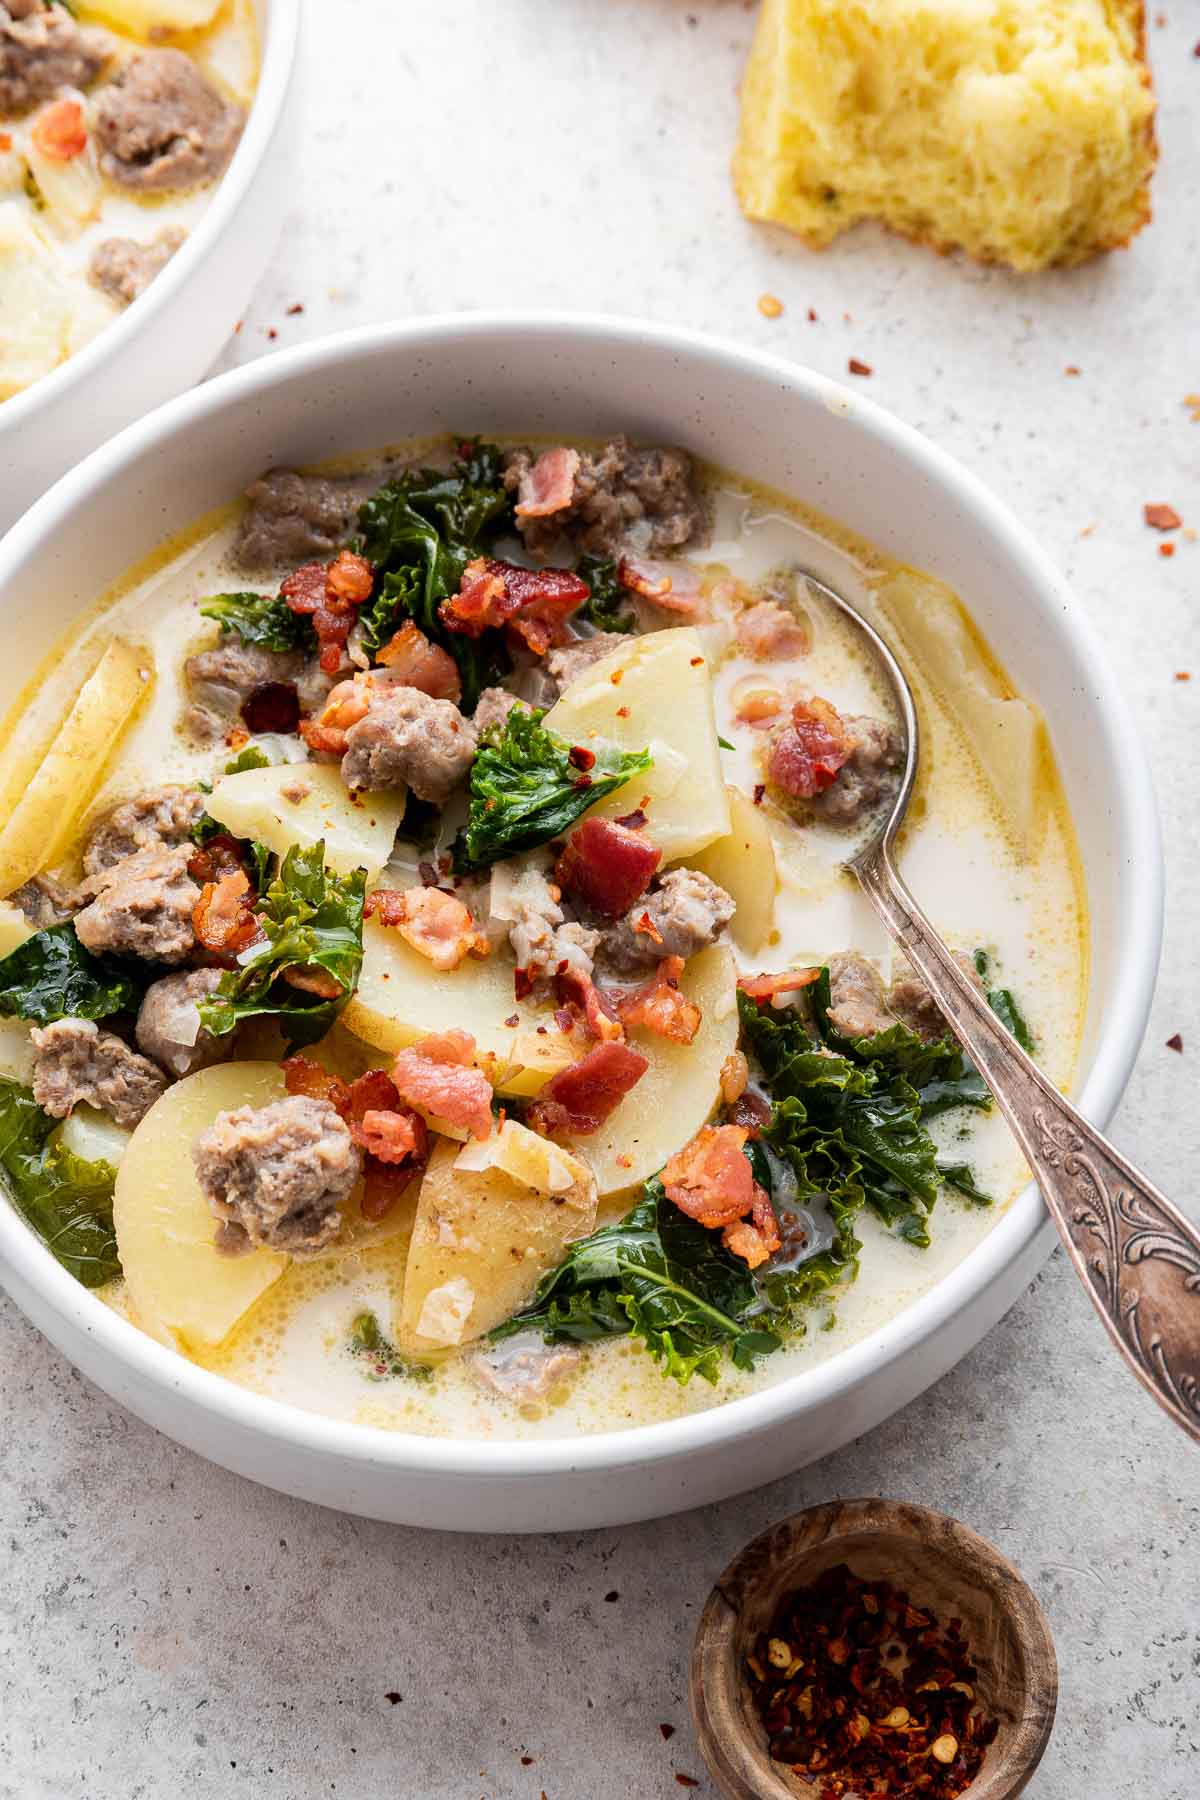 Vertical image of white creamy stew with potatoes, sausage, bacon crumbles and kale.